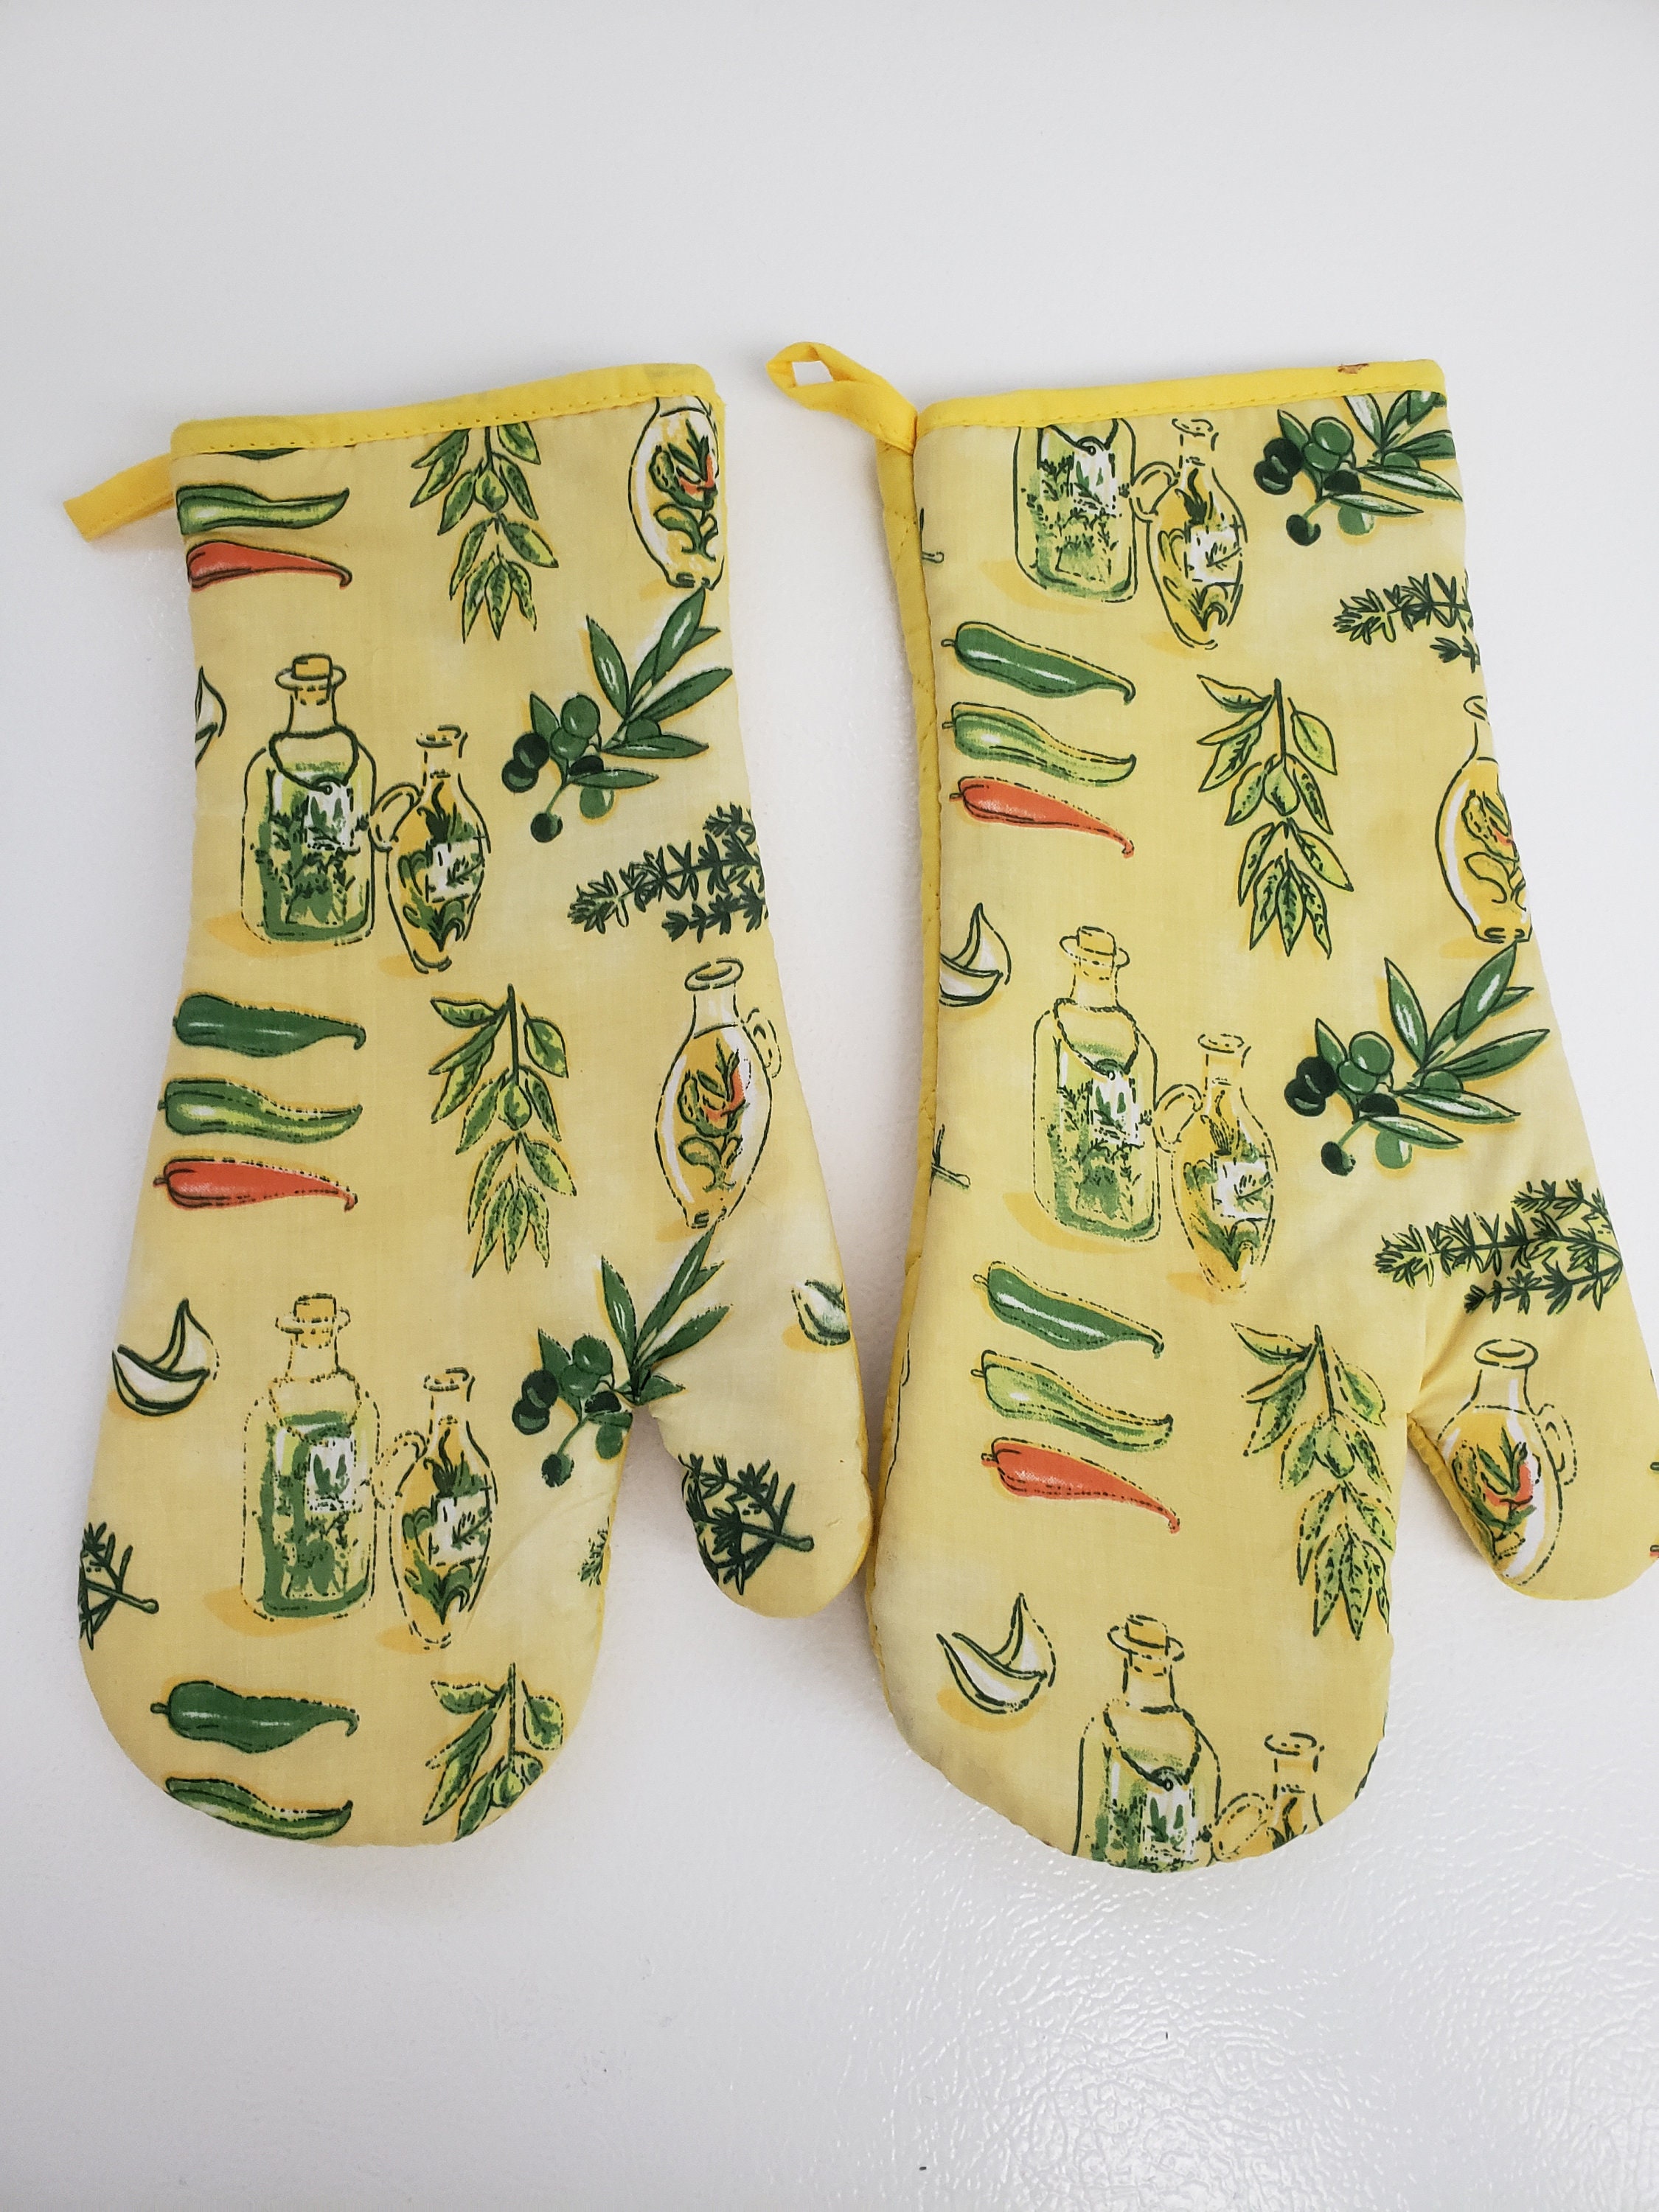 Extra Large Professional Oven Mitt